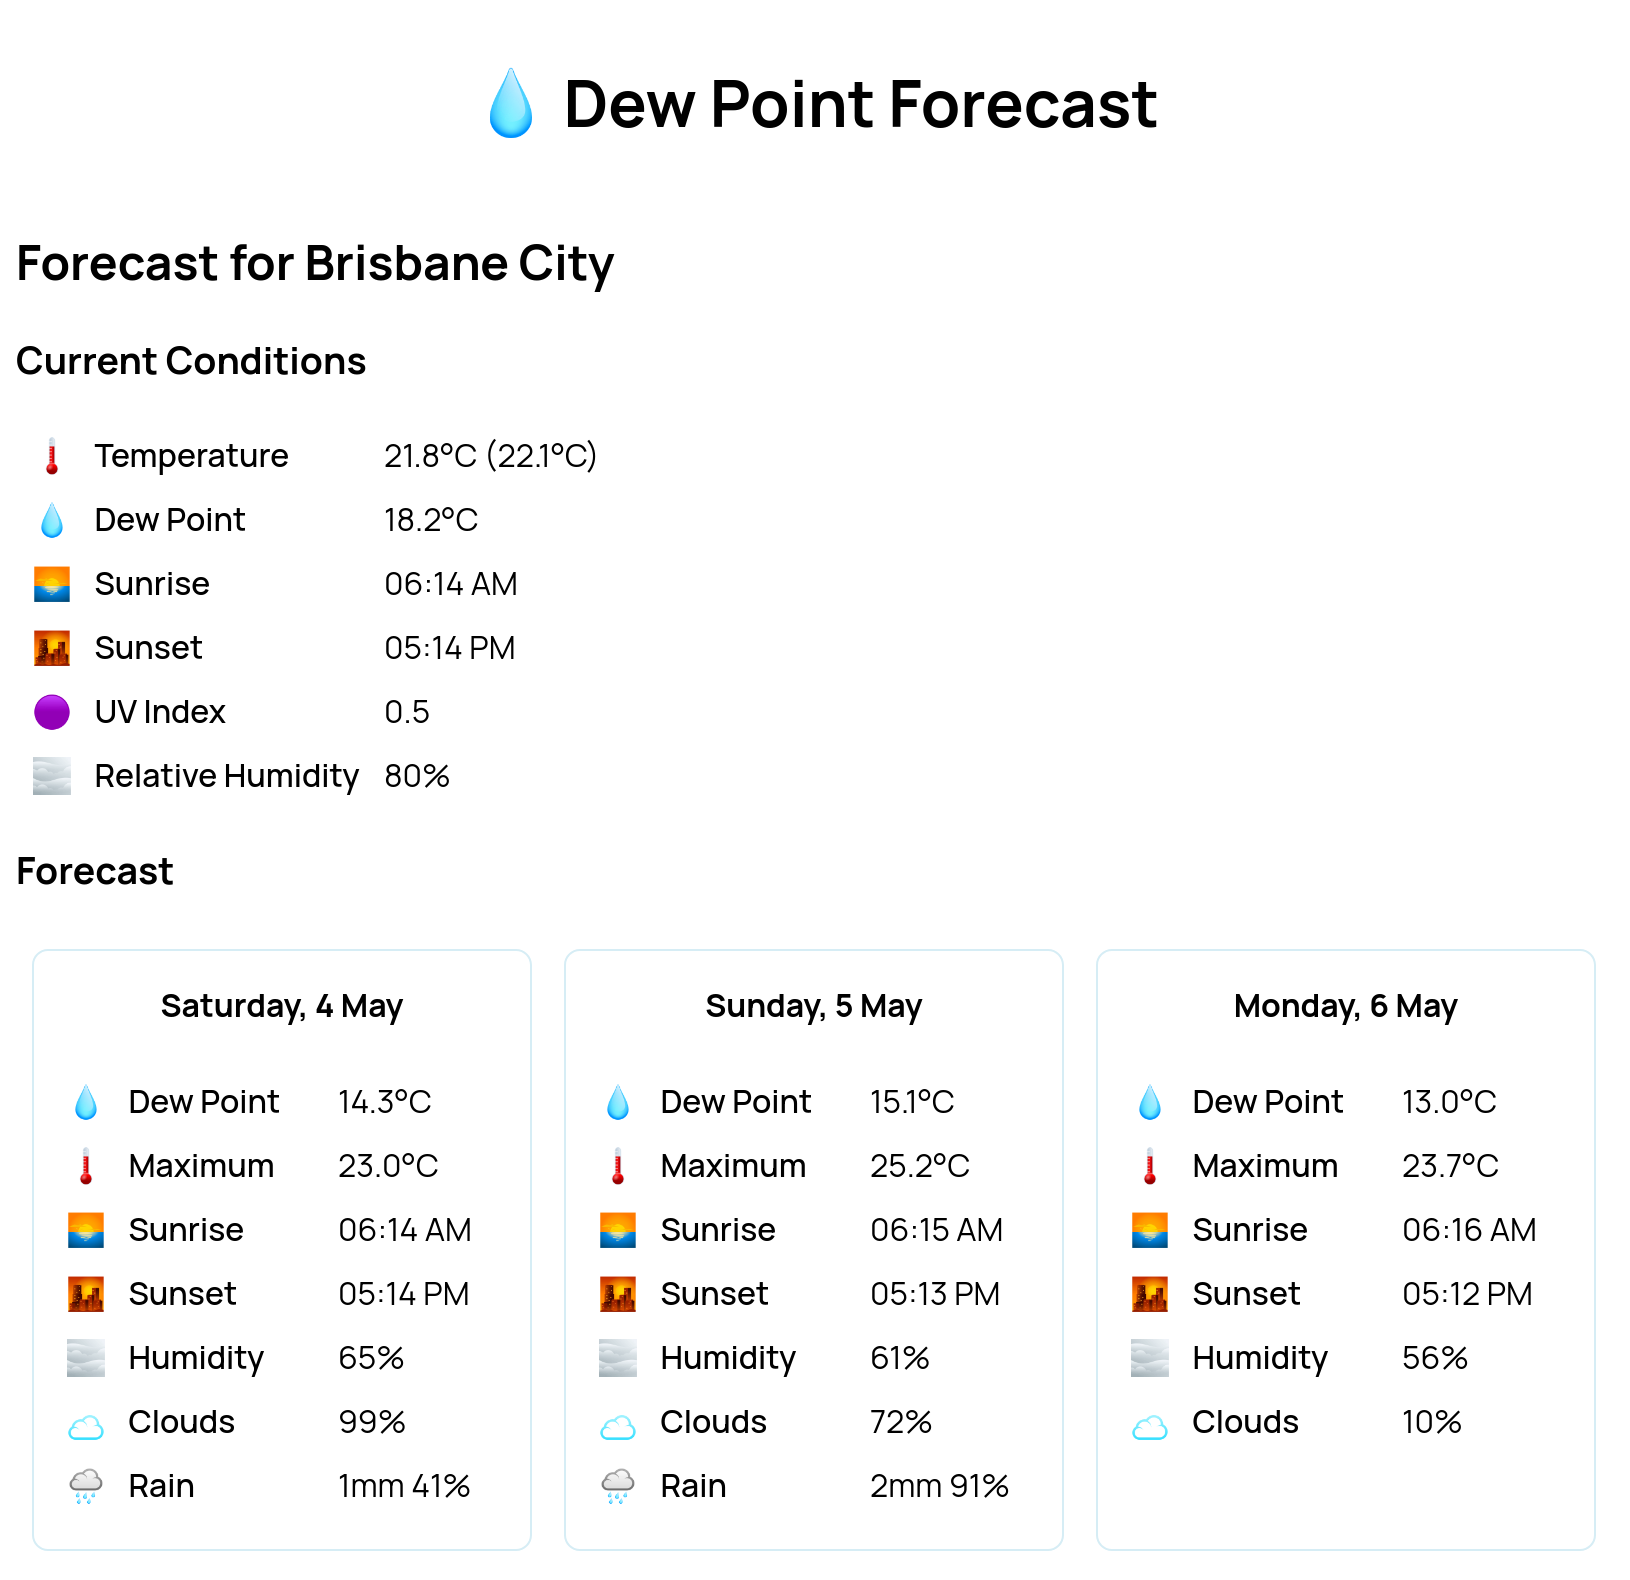 Screenshot of the dew point forecast for Brisbane, Australia. There are boxes for current conditions, Sat 4 May, Sun 5 May, and Mon 6 May. Each box contains values for temperature, dew point, sunrise, sunset, UV index, and relative humidity.